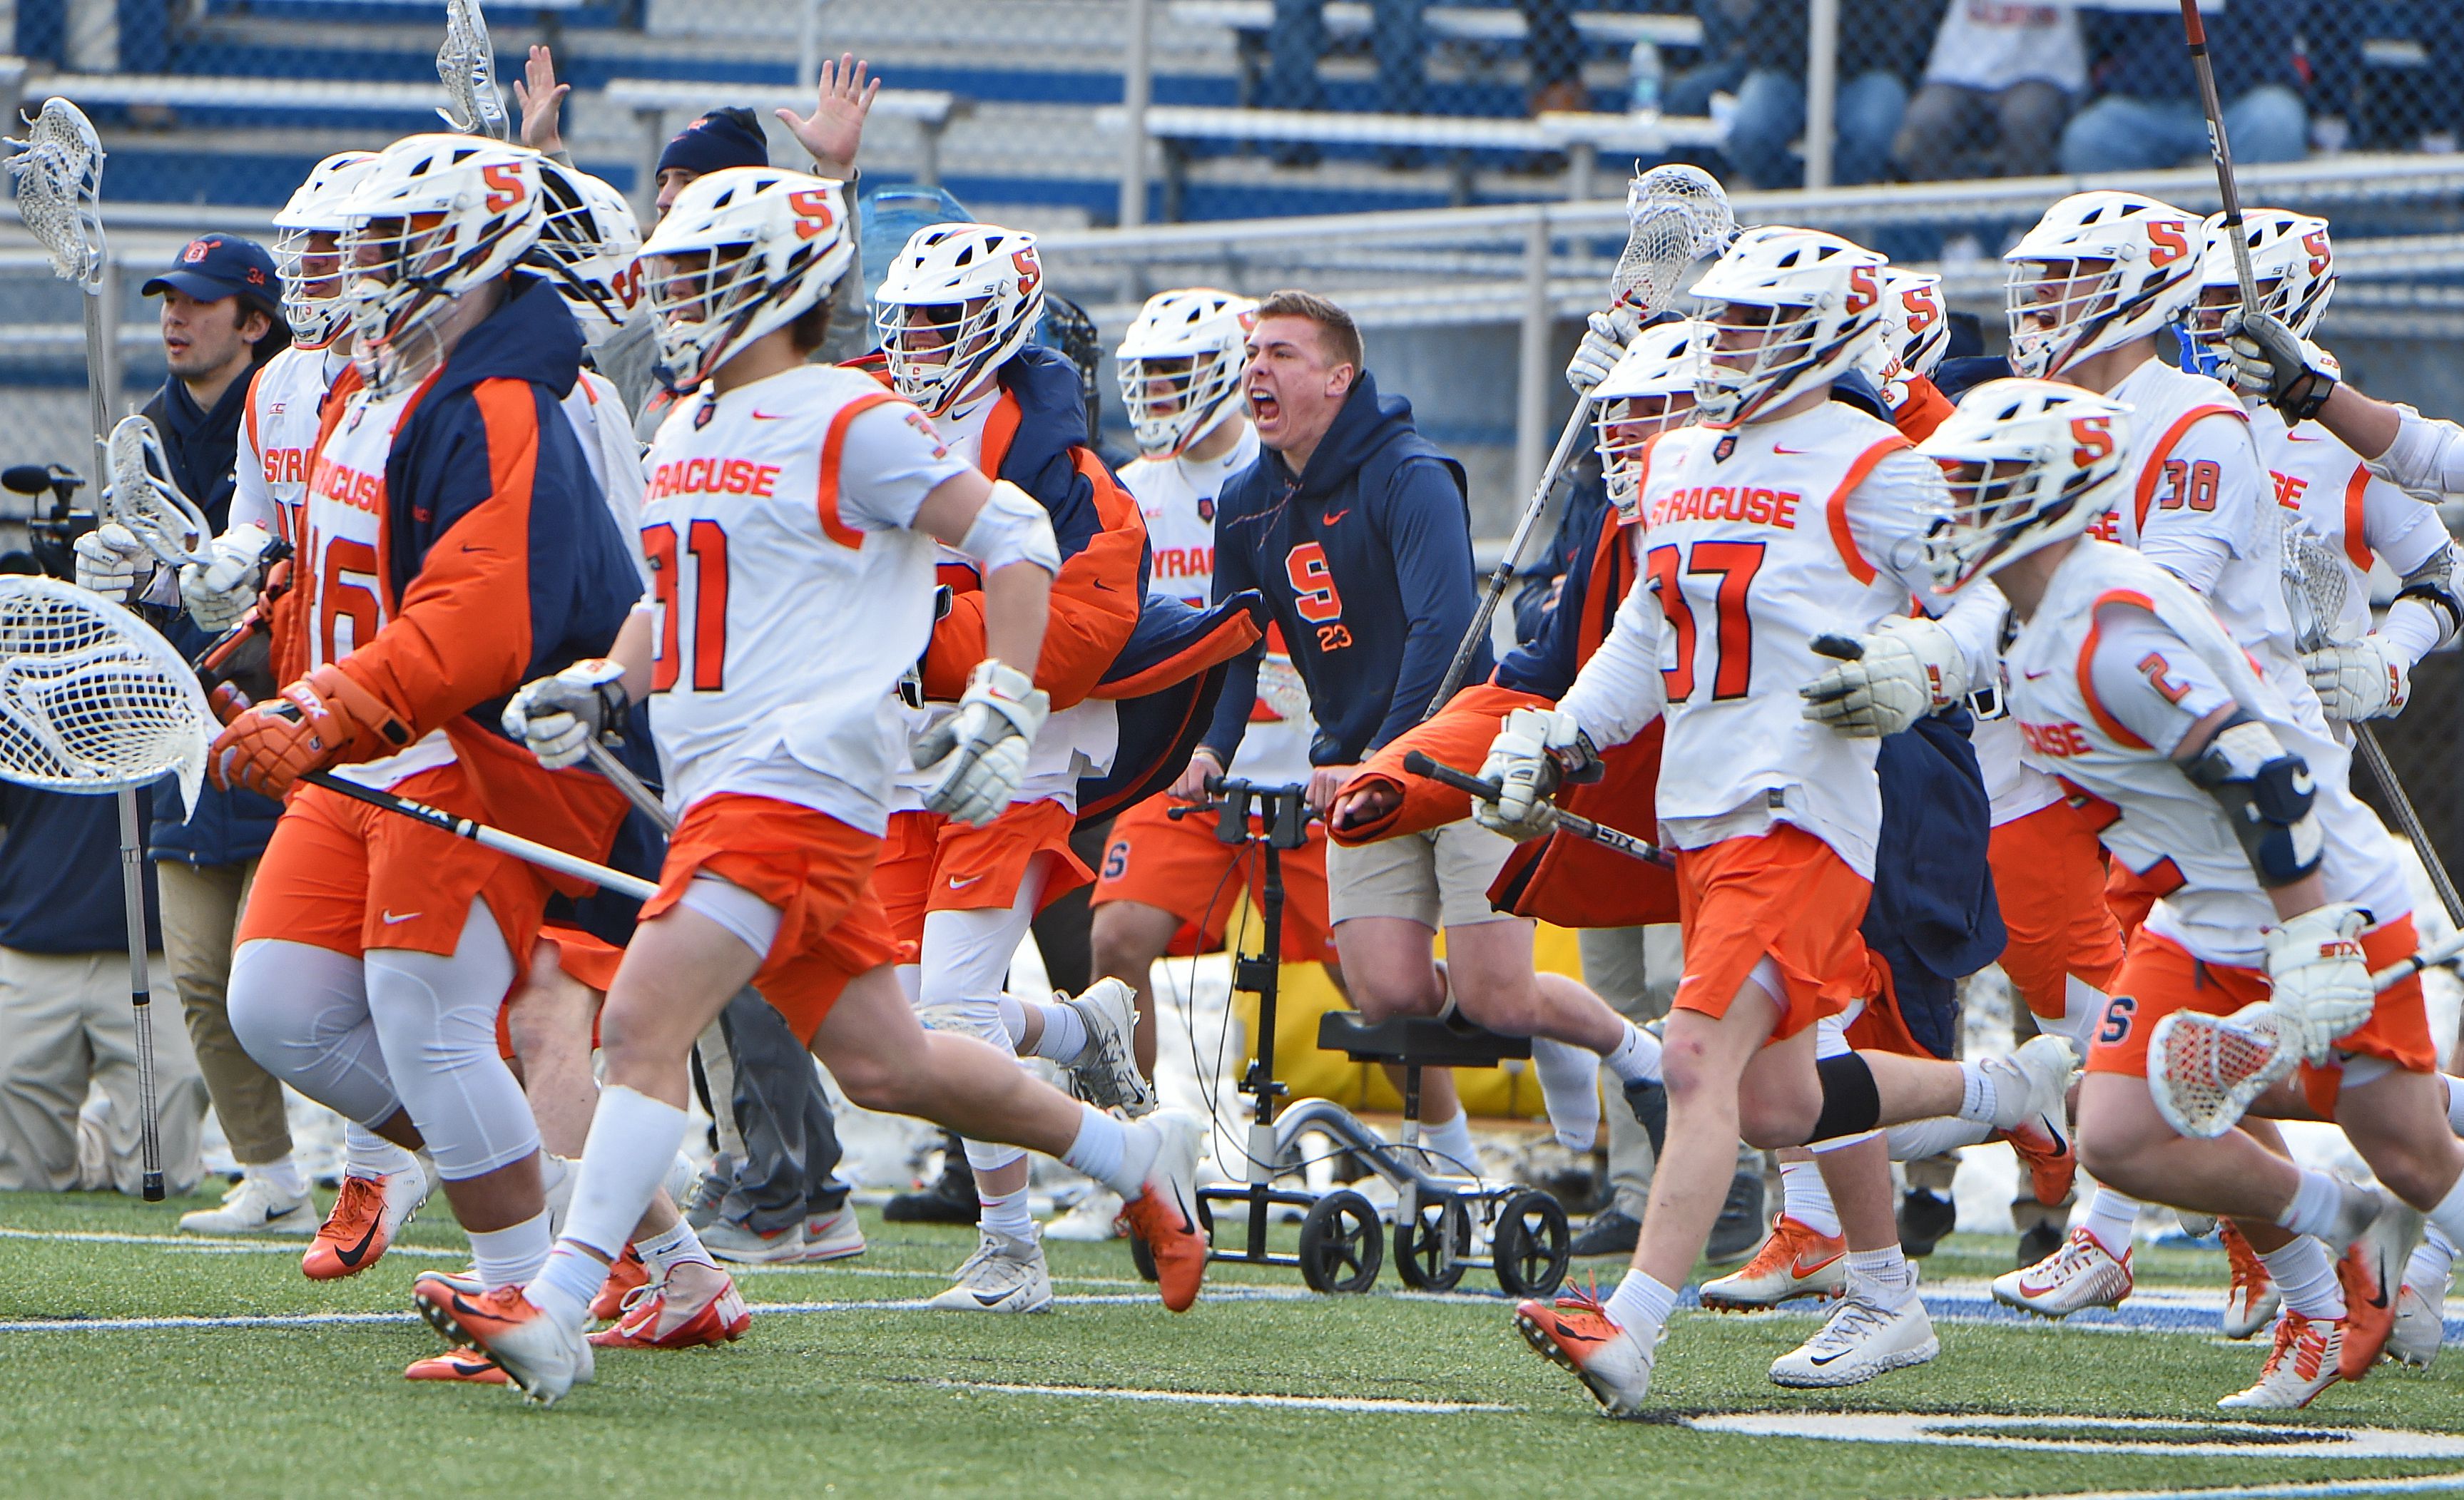 syracuse lax game today